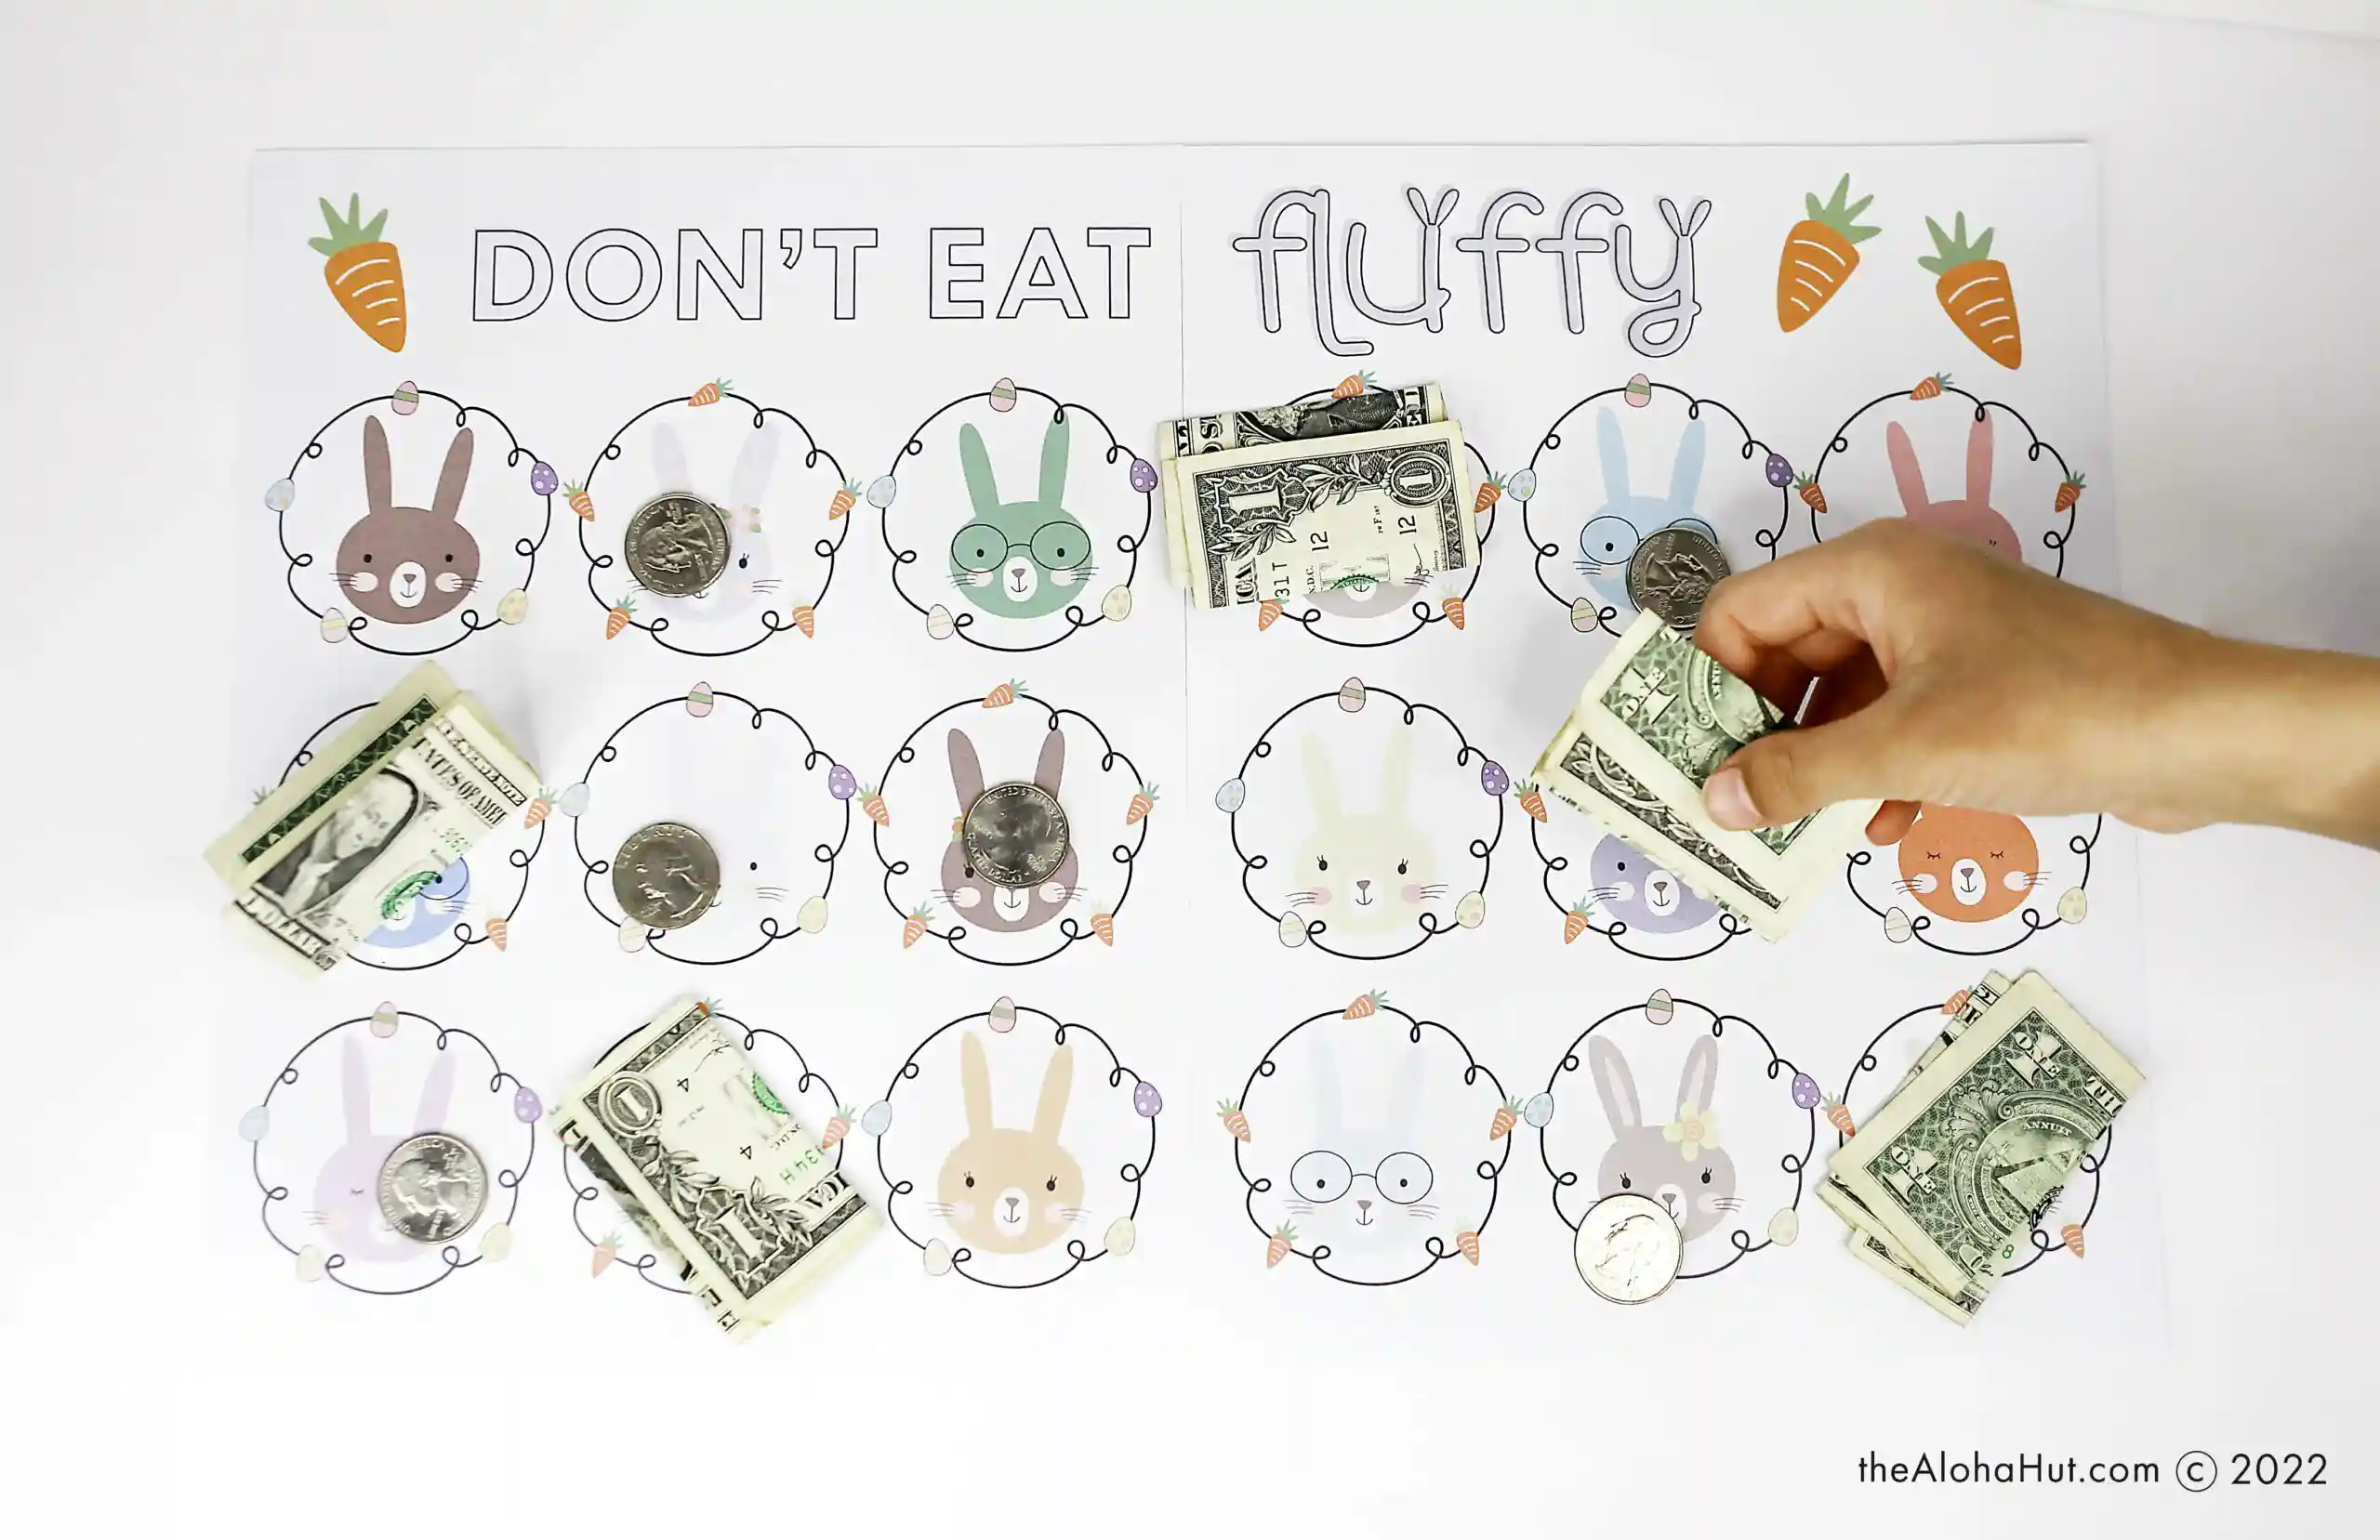 Fun and easy Easter game for kids. This printable Easter game is similar to the Don't Eat Pete game, but the Easter version called Don't Eat Fluffy. This is an easy Easter game for your kids Easter party or for an Easter game for a class party at school. Print and let the kids earn yummy Easter treats or small Easter prizes.